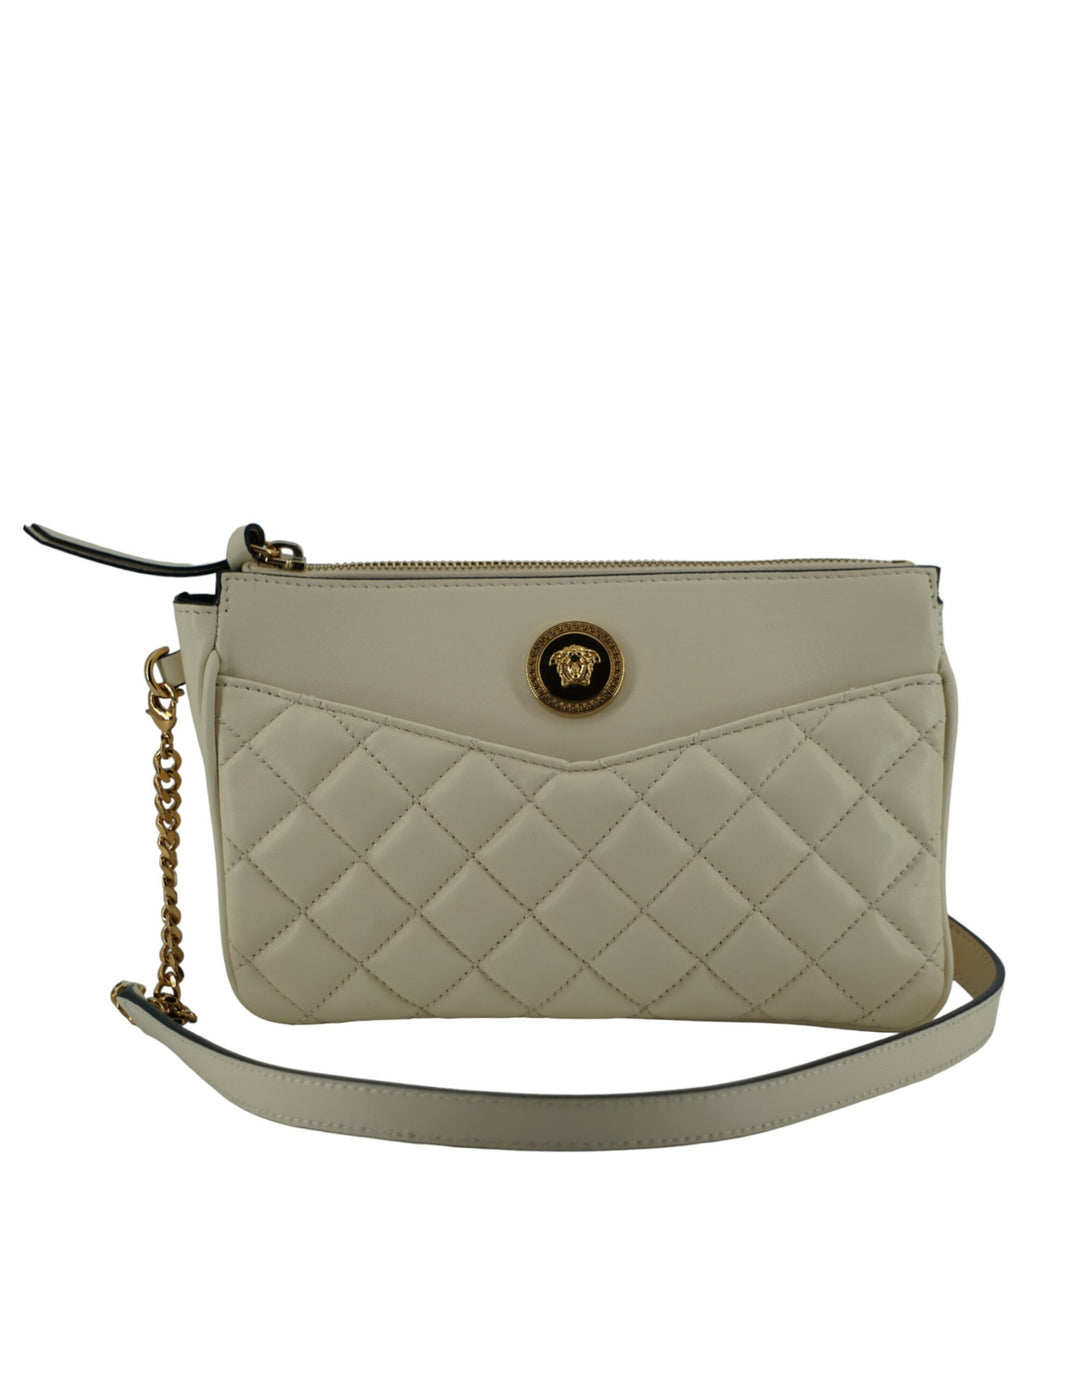 Versace White Lamb Leather Pouch Crossbody Bag